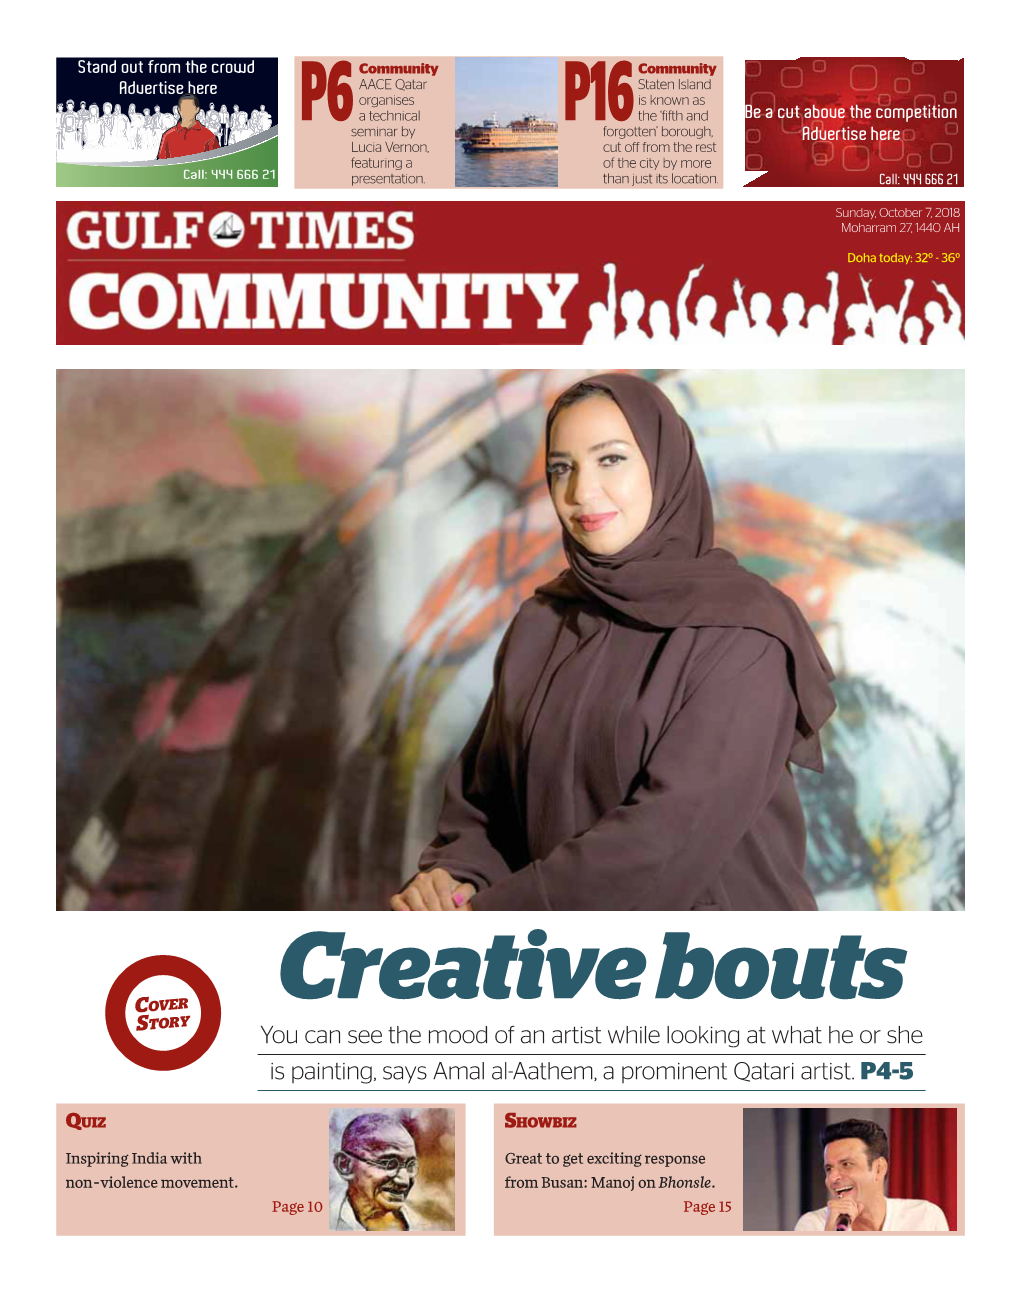 You Can See the Mood of an Artist While Looking at What He Or She Is Painting, Says Amal Al-Aathem, a Prominent Qatari Artist